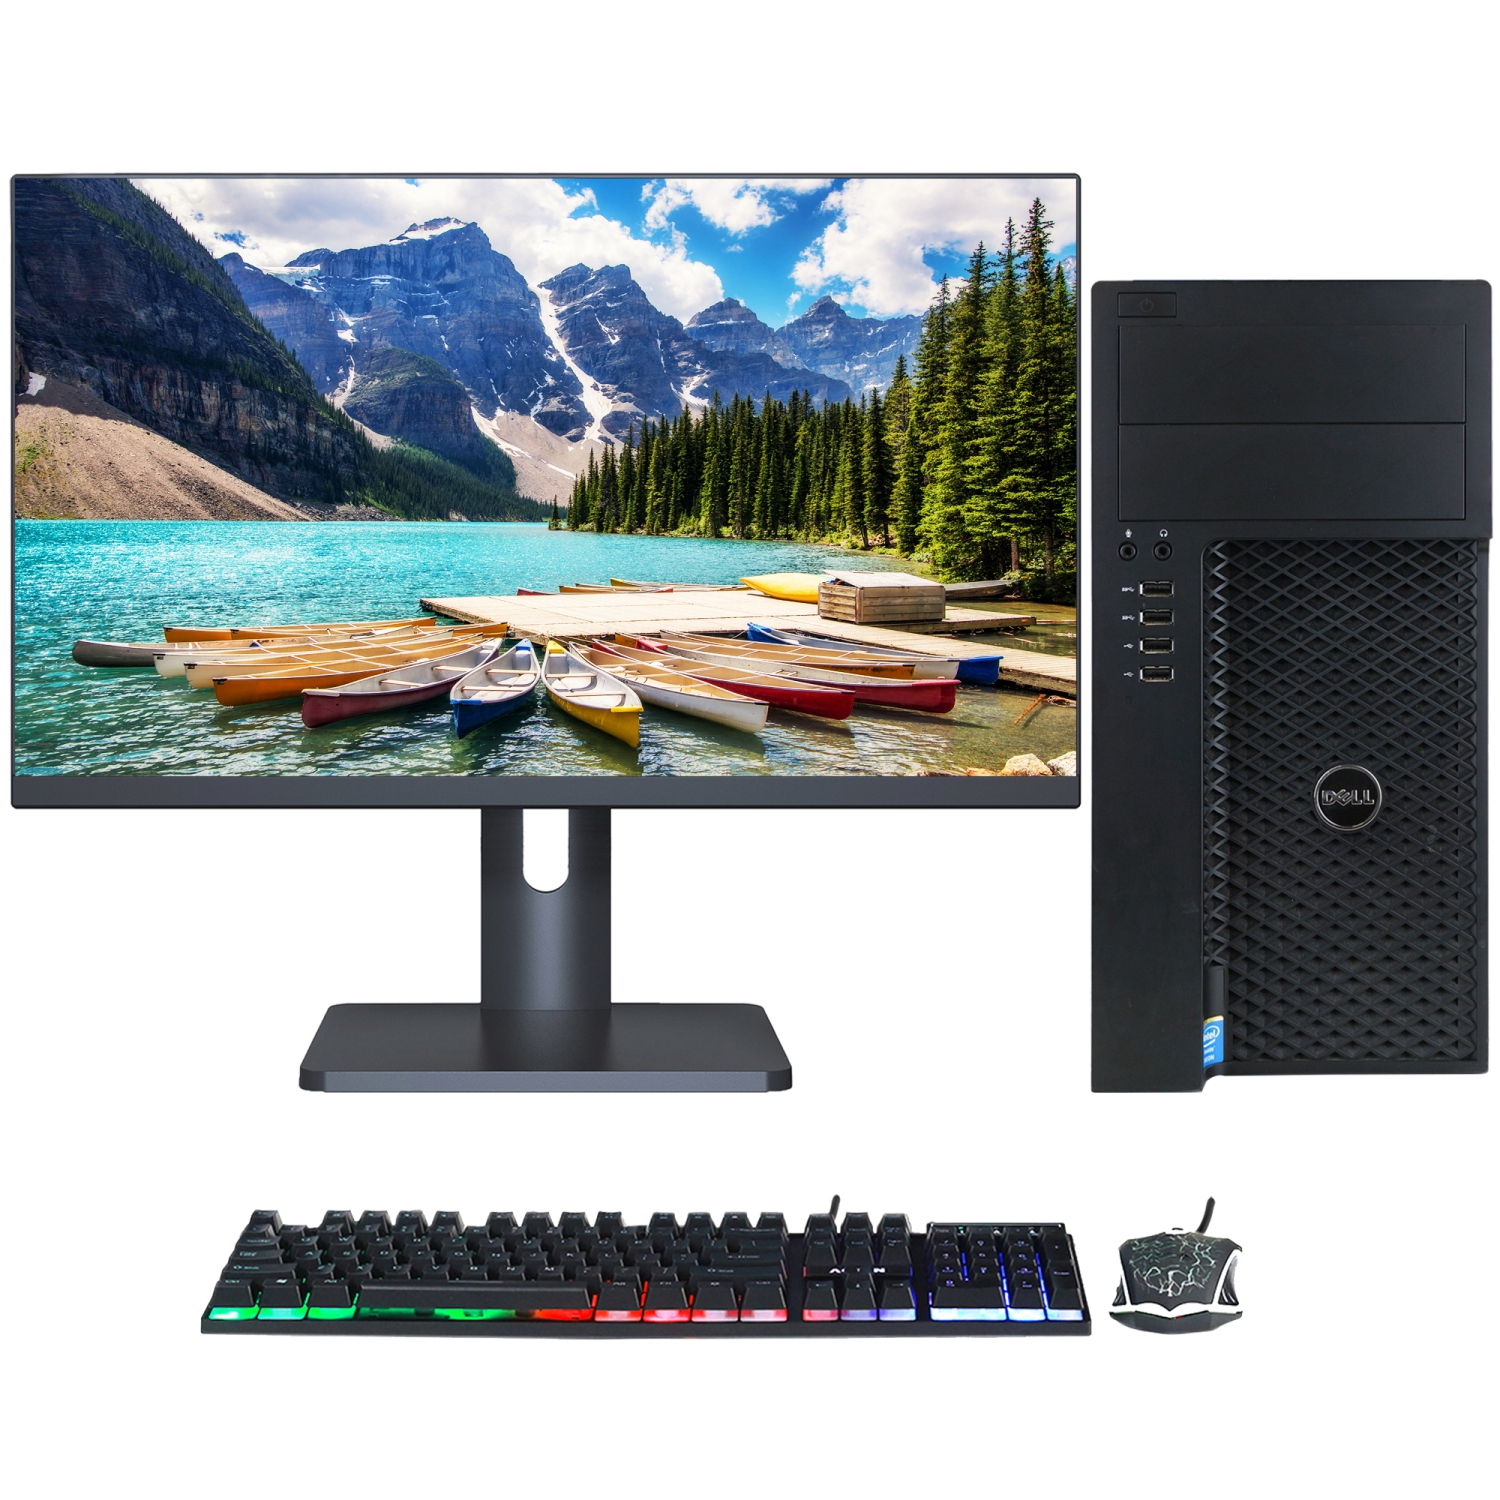 Refurbished (Good) - Desktop Computer Dell Precision T1700 Tower PC (Core i7| 512GB SSD| 16GB RAM| Windows 10 Pro| Gaming Keyboard and Mouse) New 27" Monitor, Intel Processor